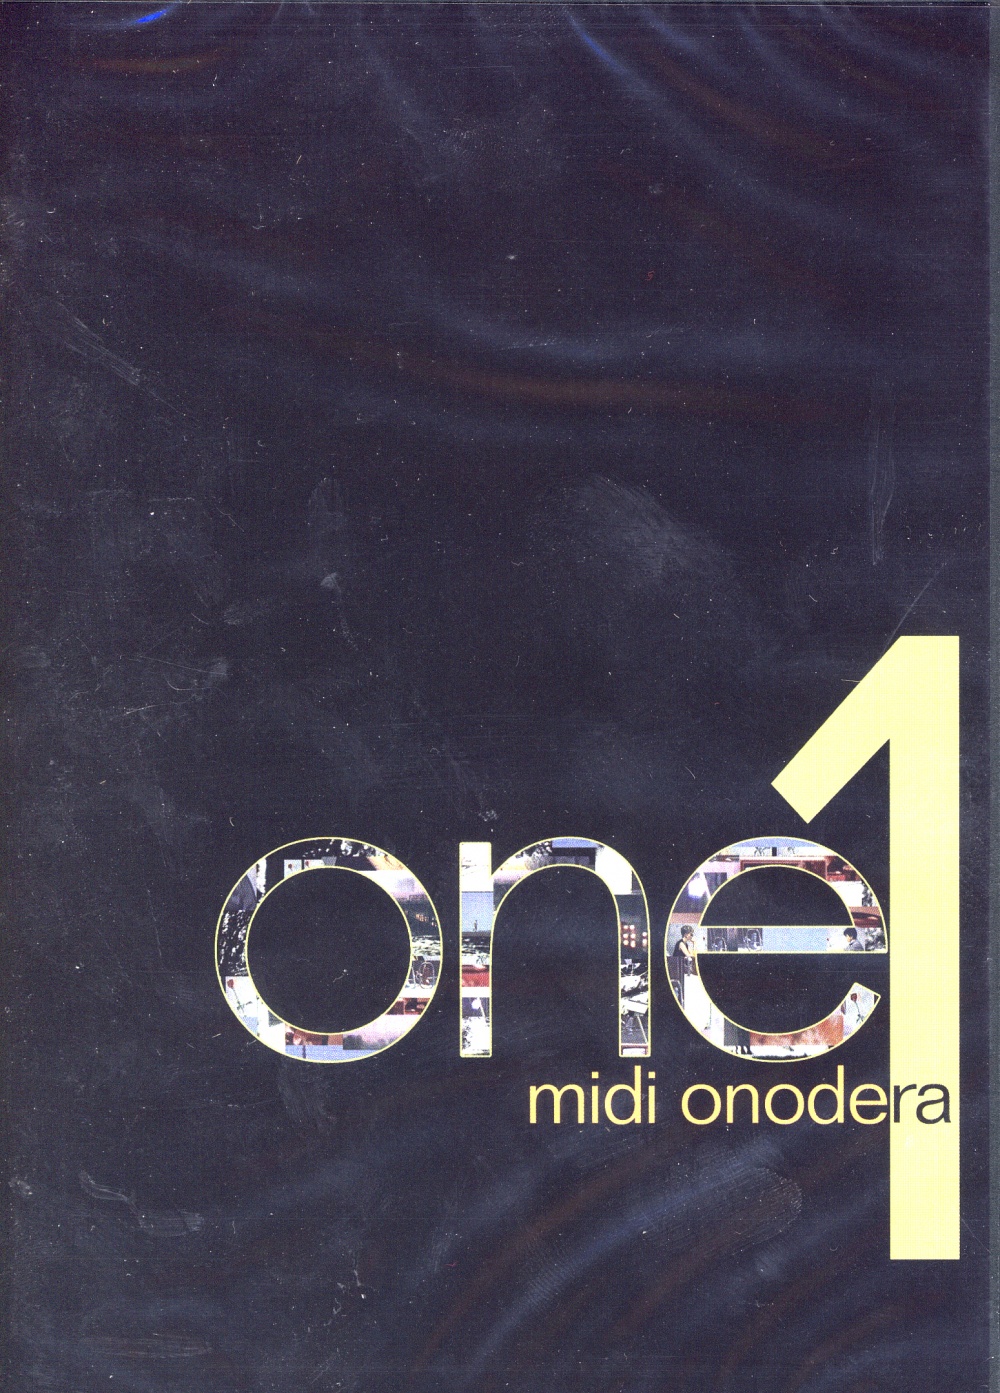 One 1